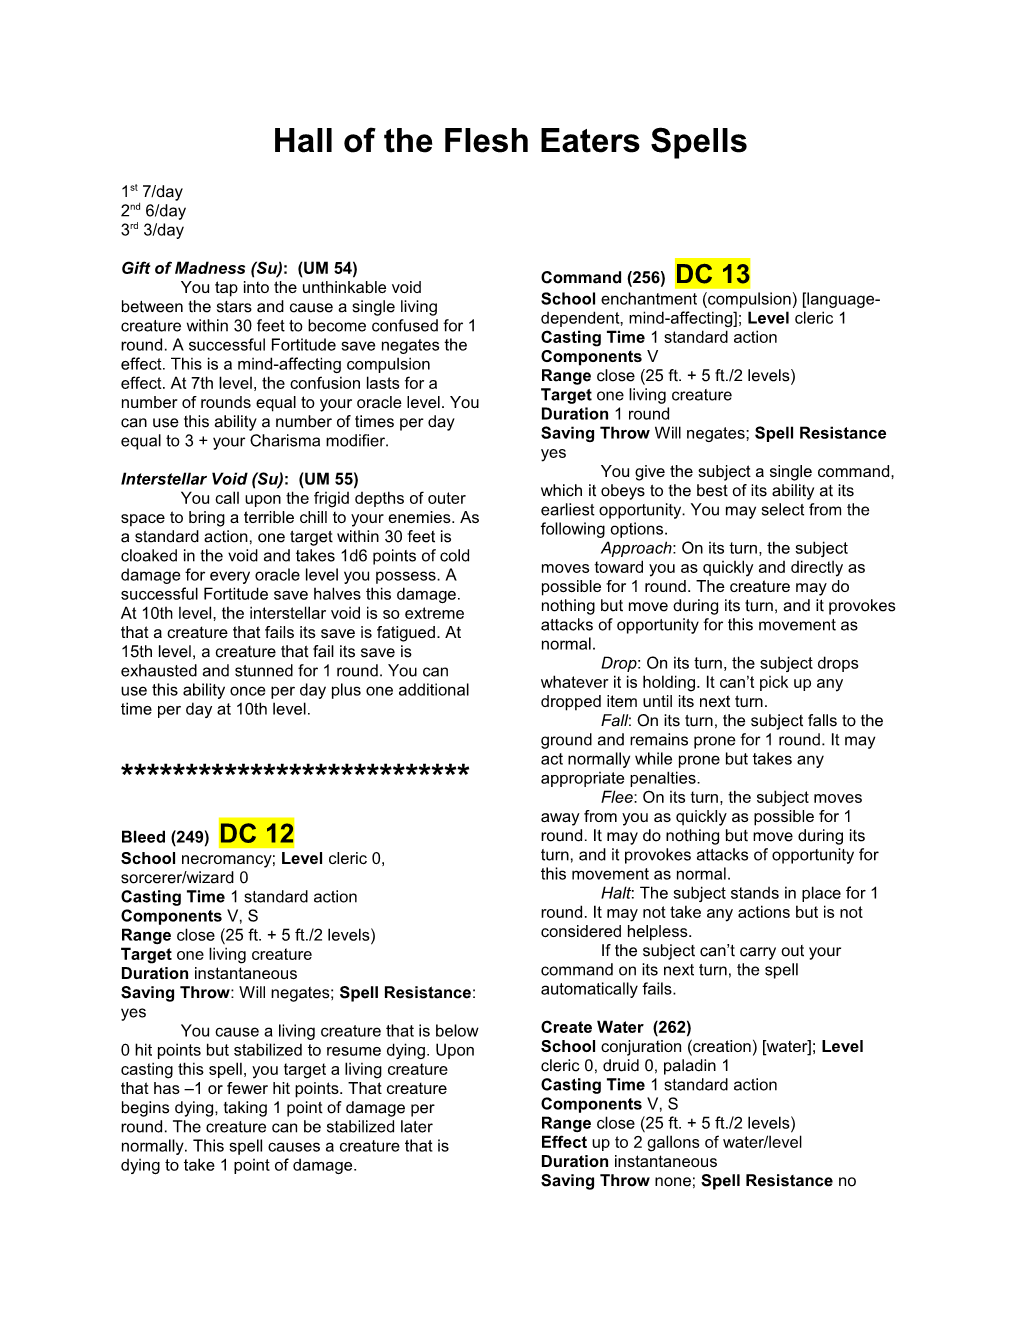 Hall of the Flesh Eaters Spells